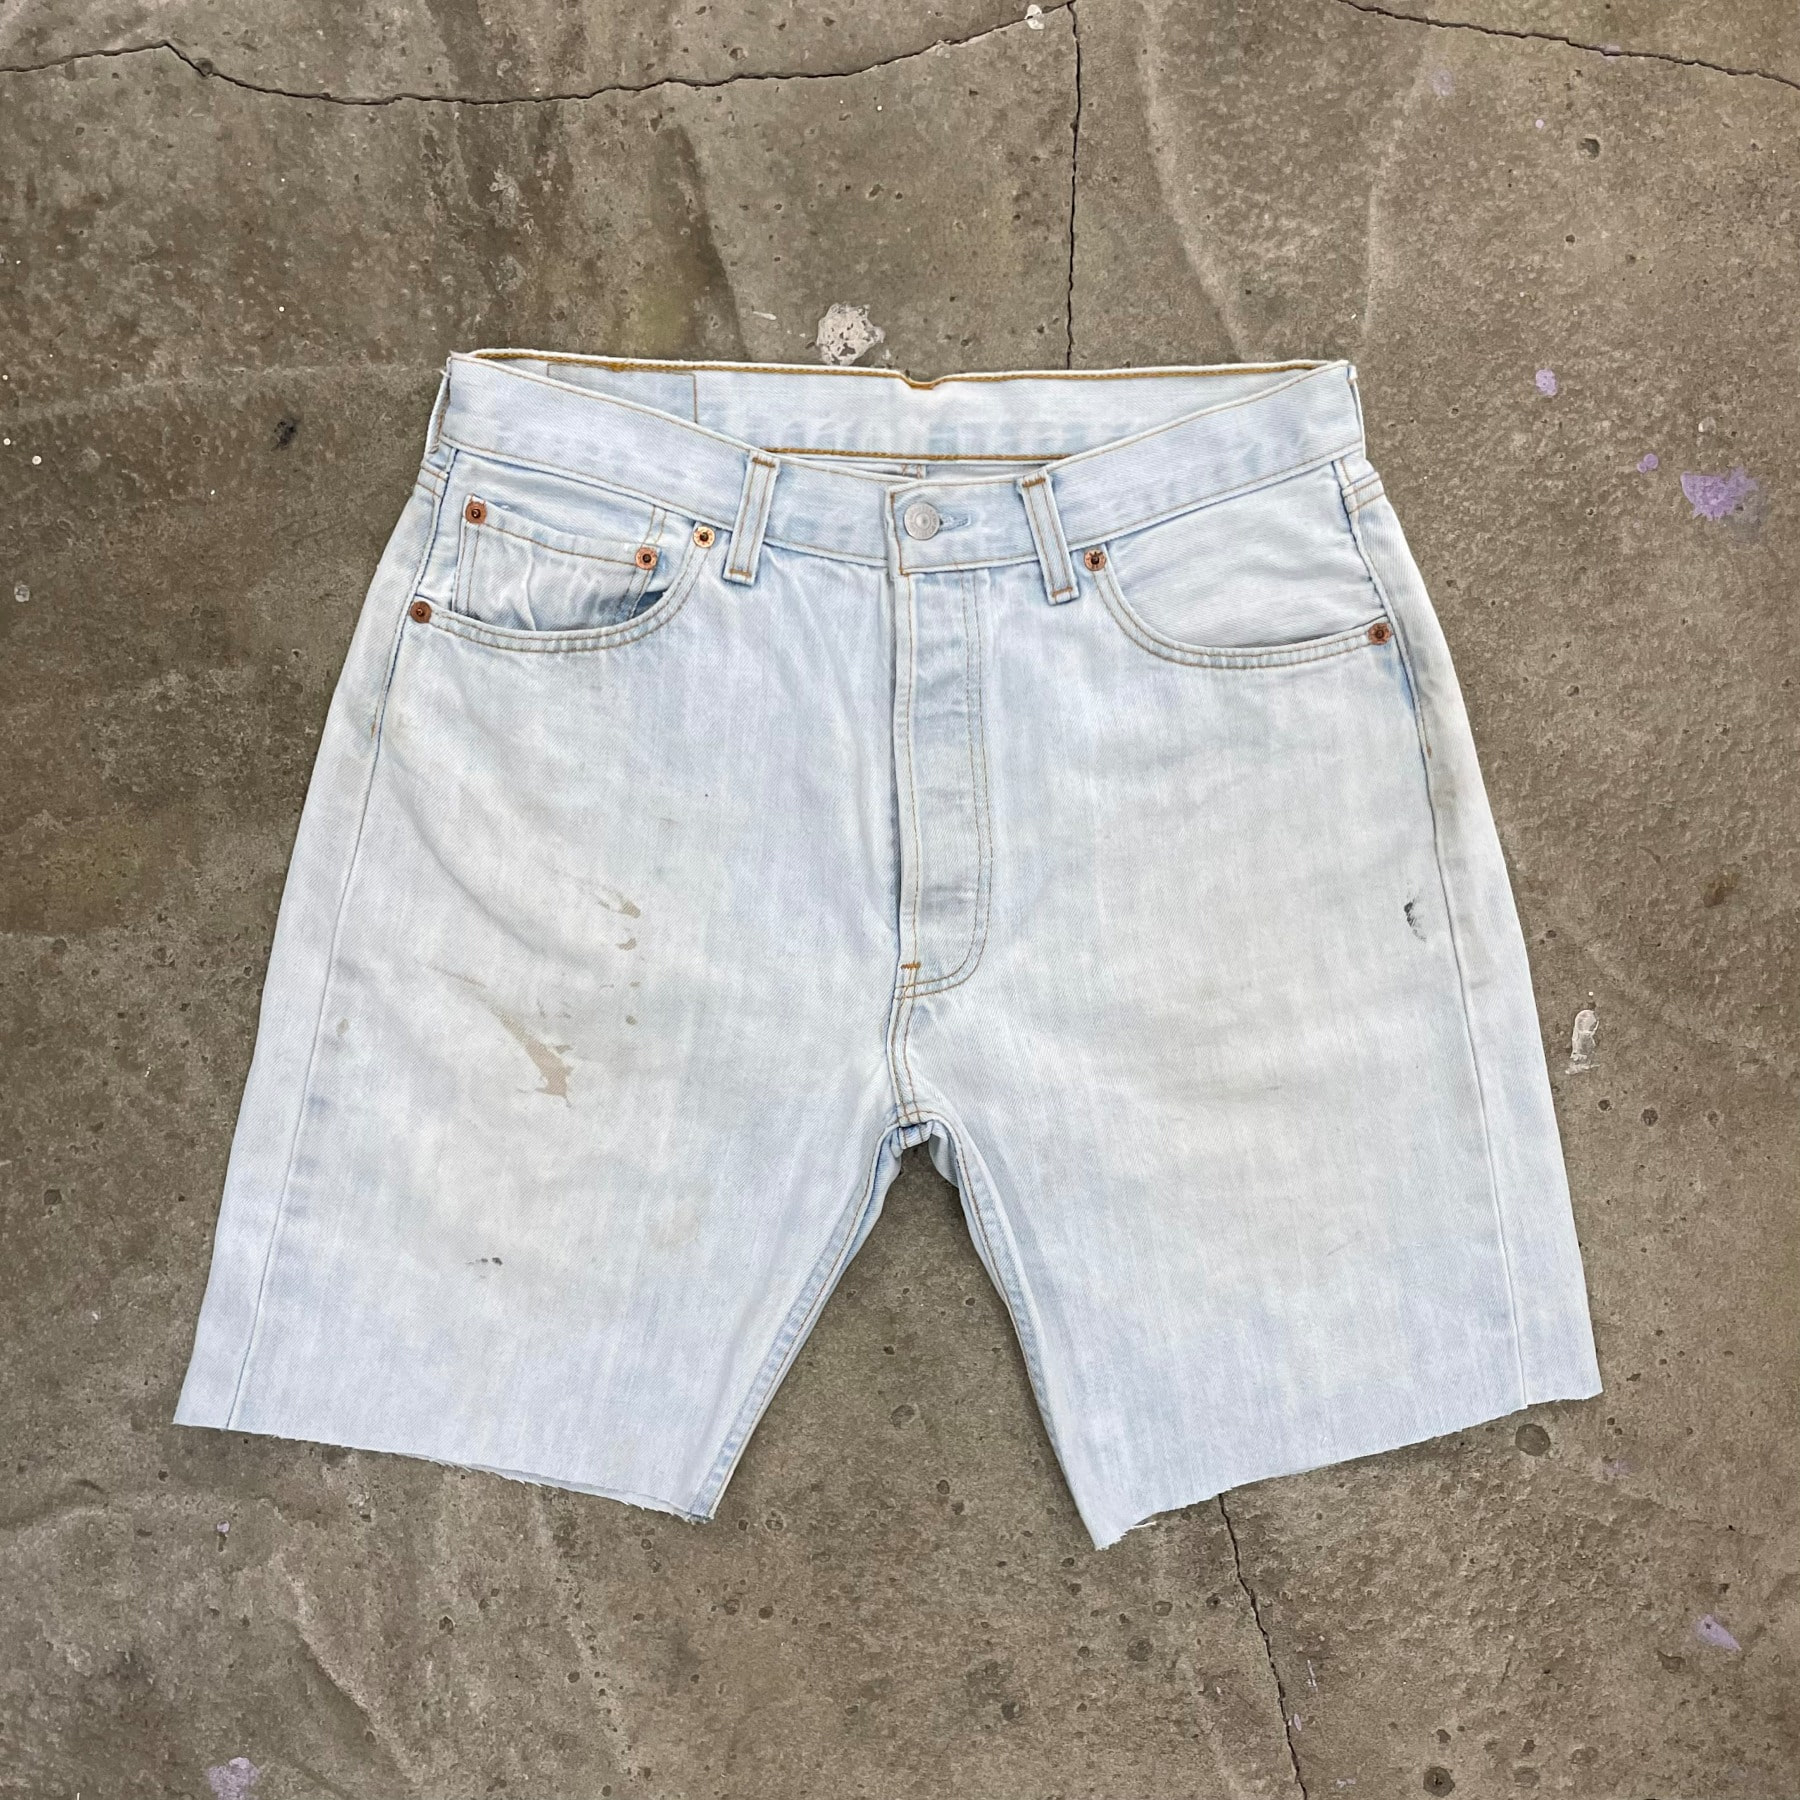 Vintage Levis 501 Cut Off Shorts (Made in SPAIN) - 32inch